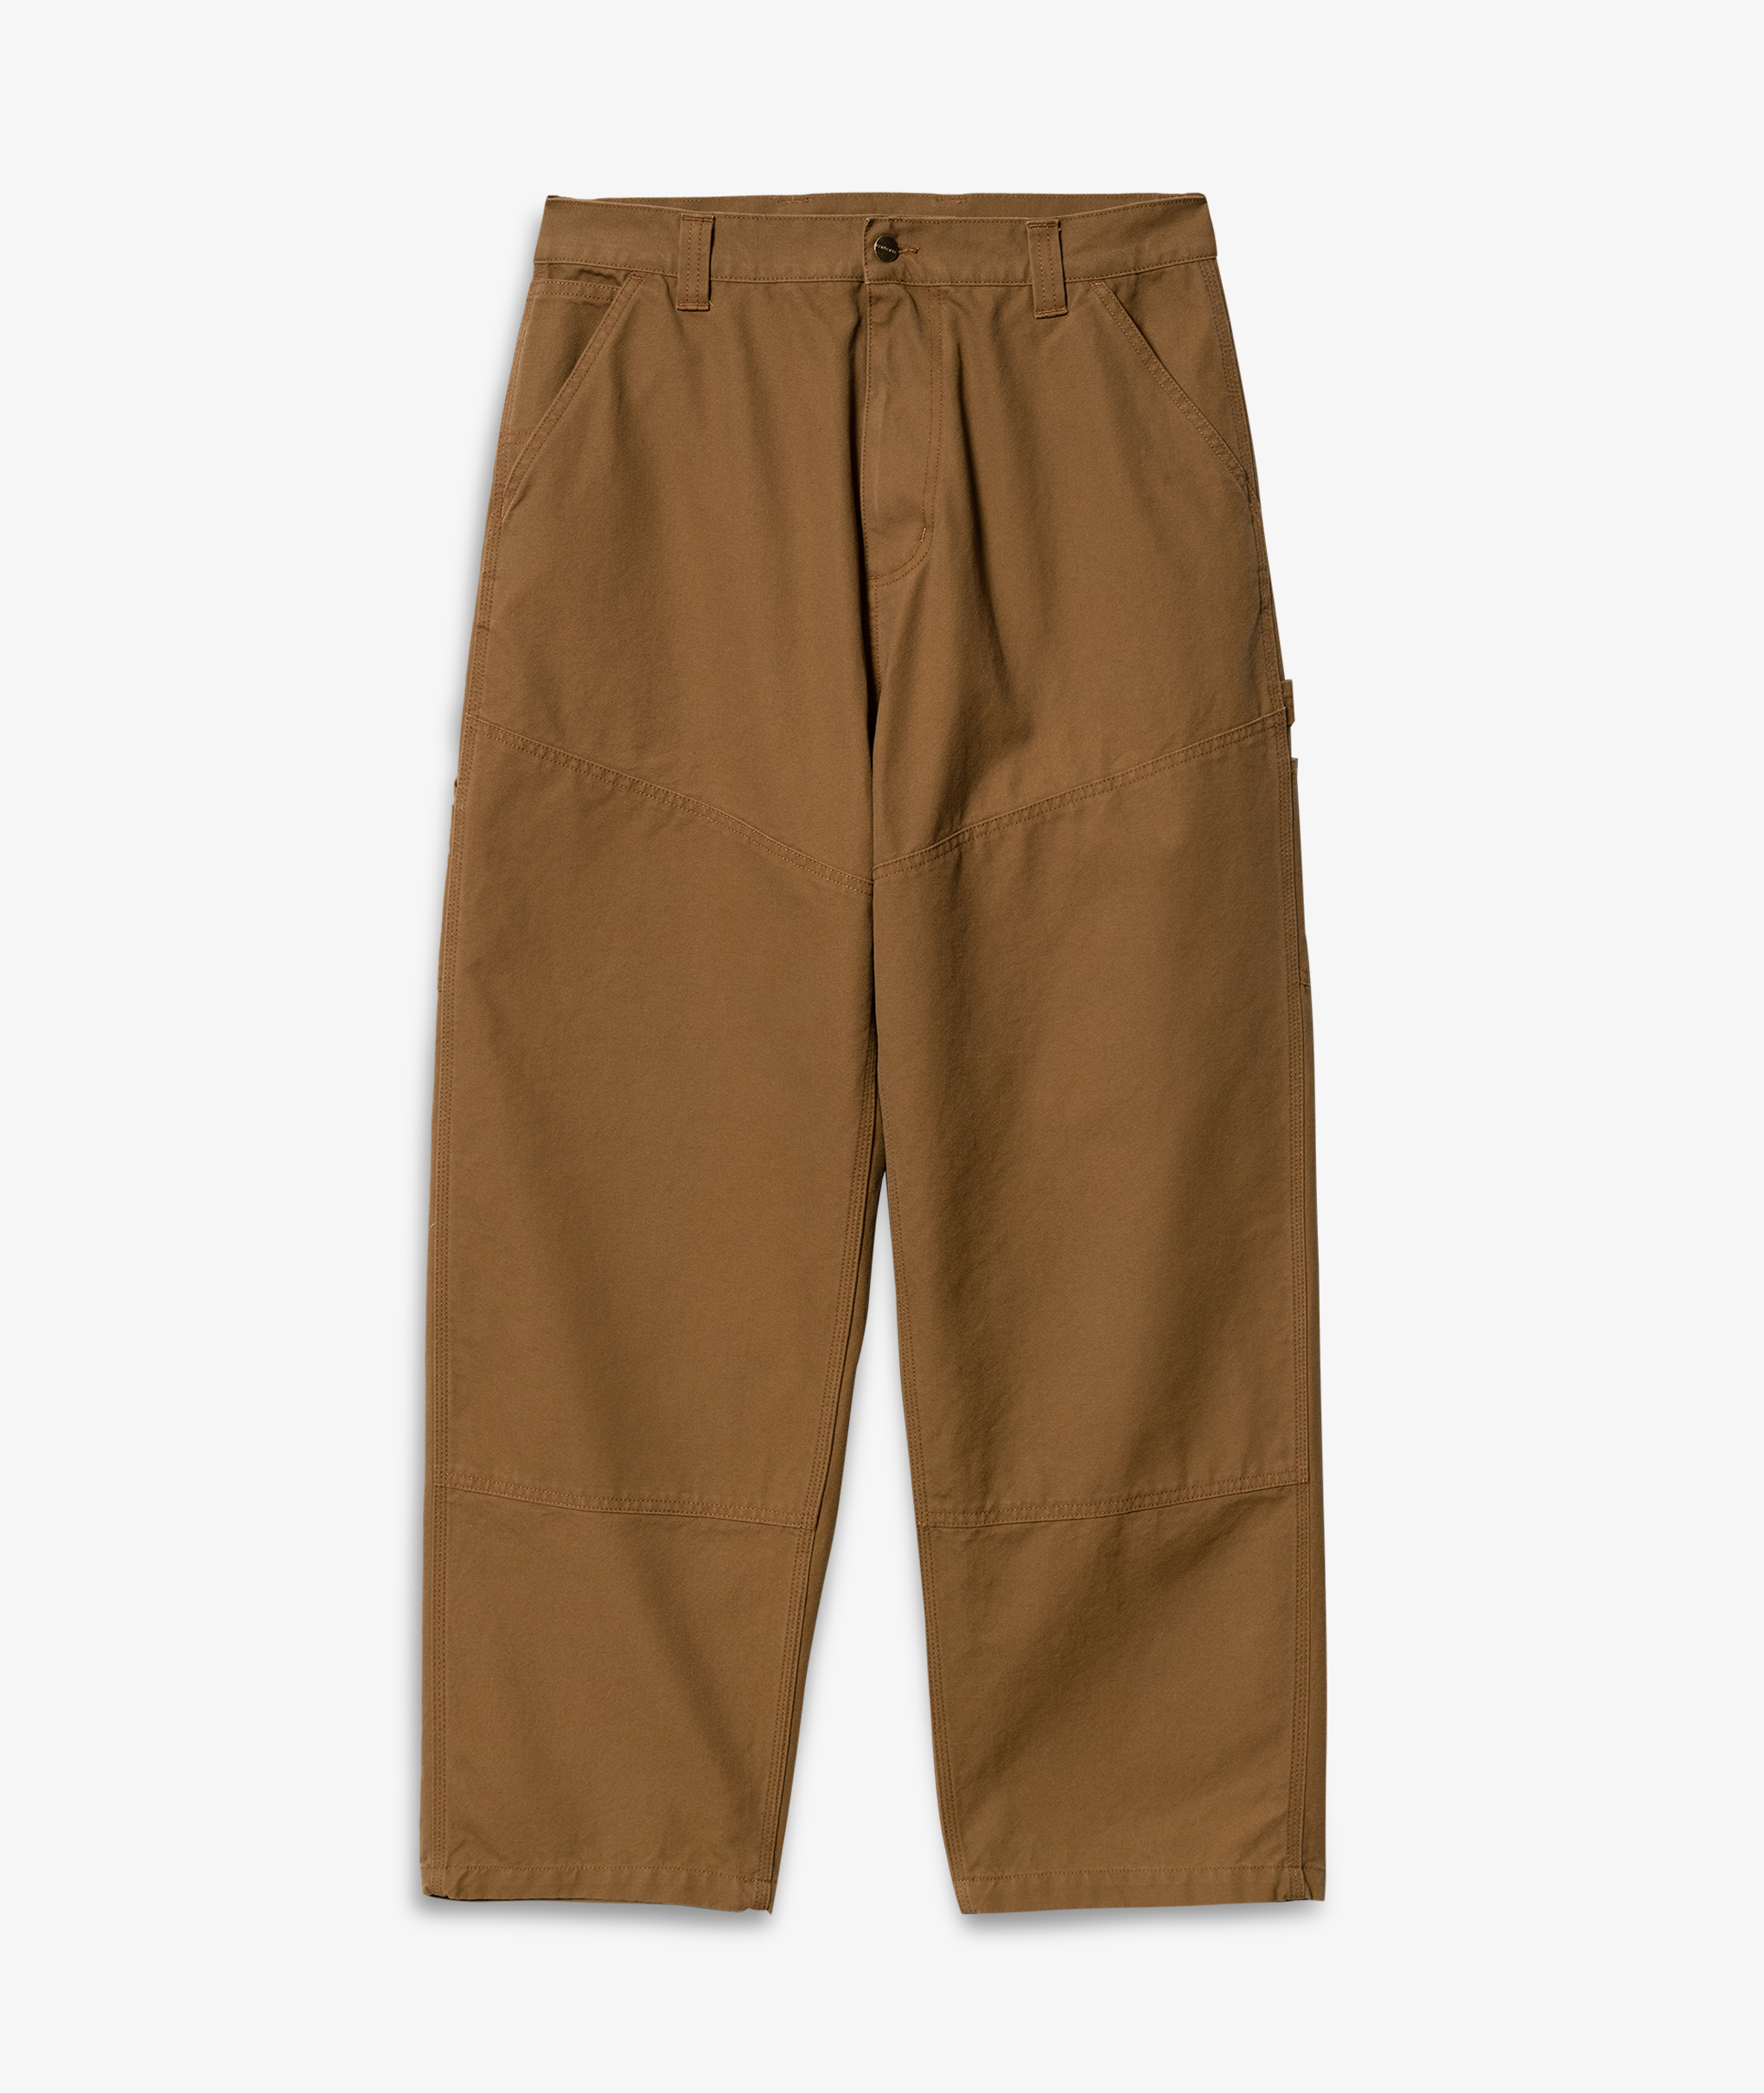 Norse Store | Shipping Worldwide - Carhartt WIP Wide Panel Pant ...